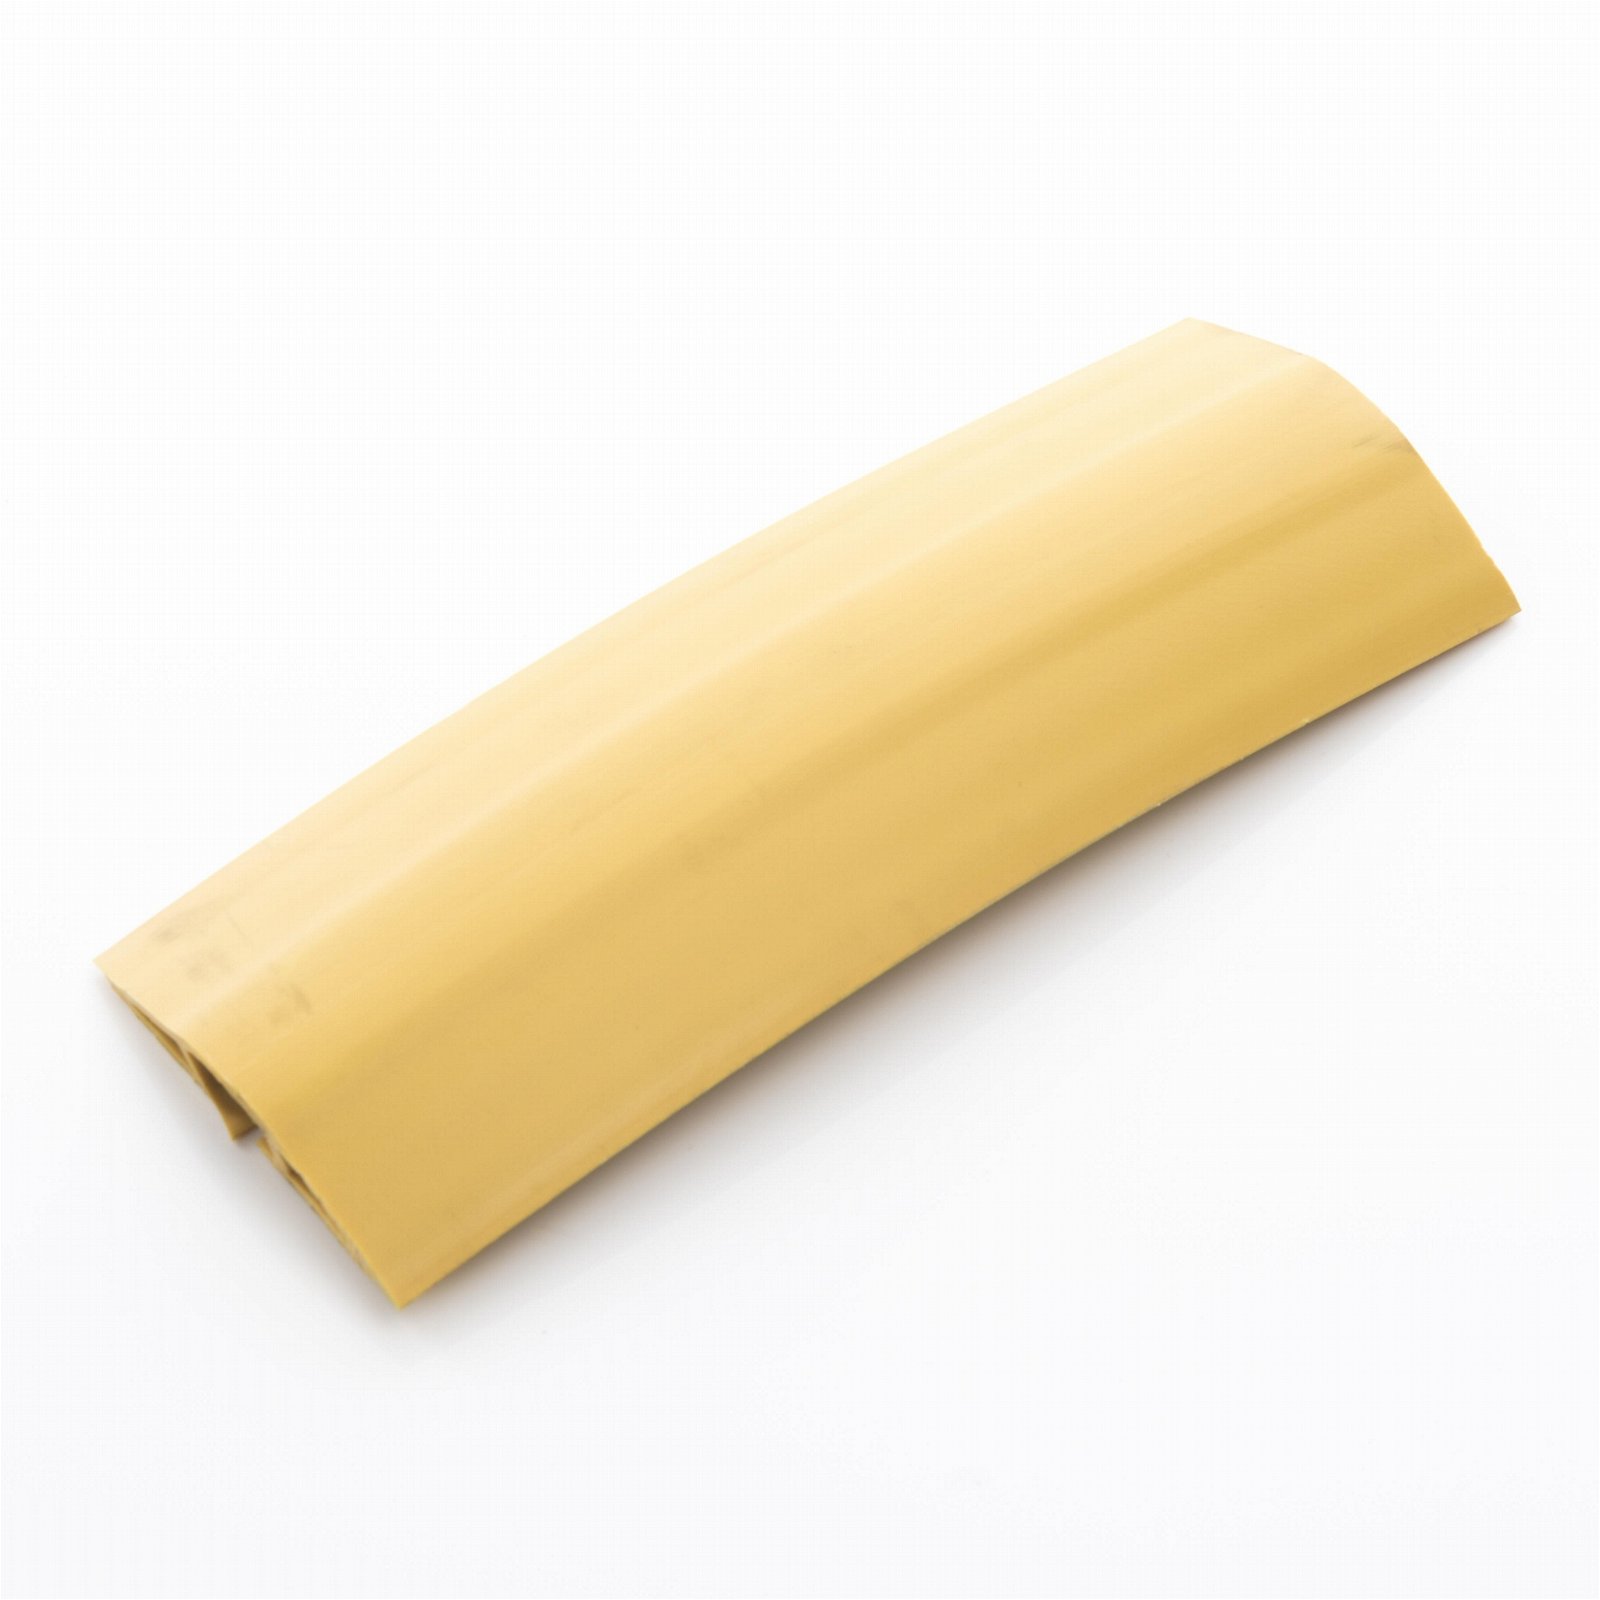  Soft PVC Solid  floor pvc trunking  yellow  2